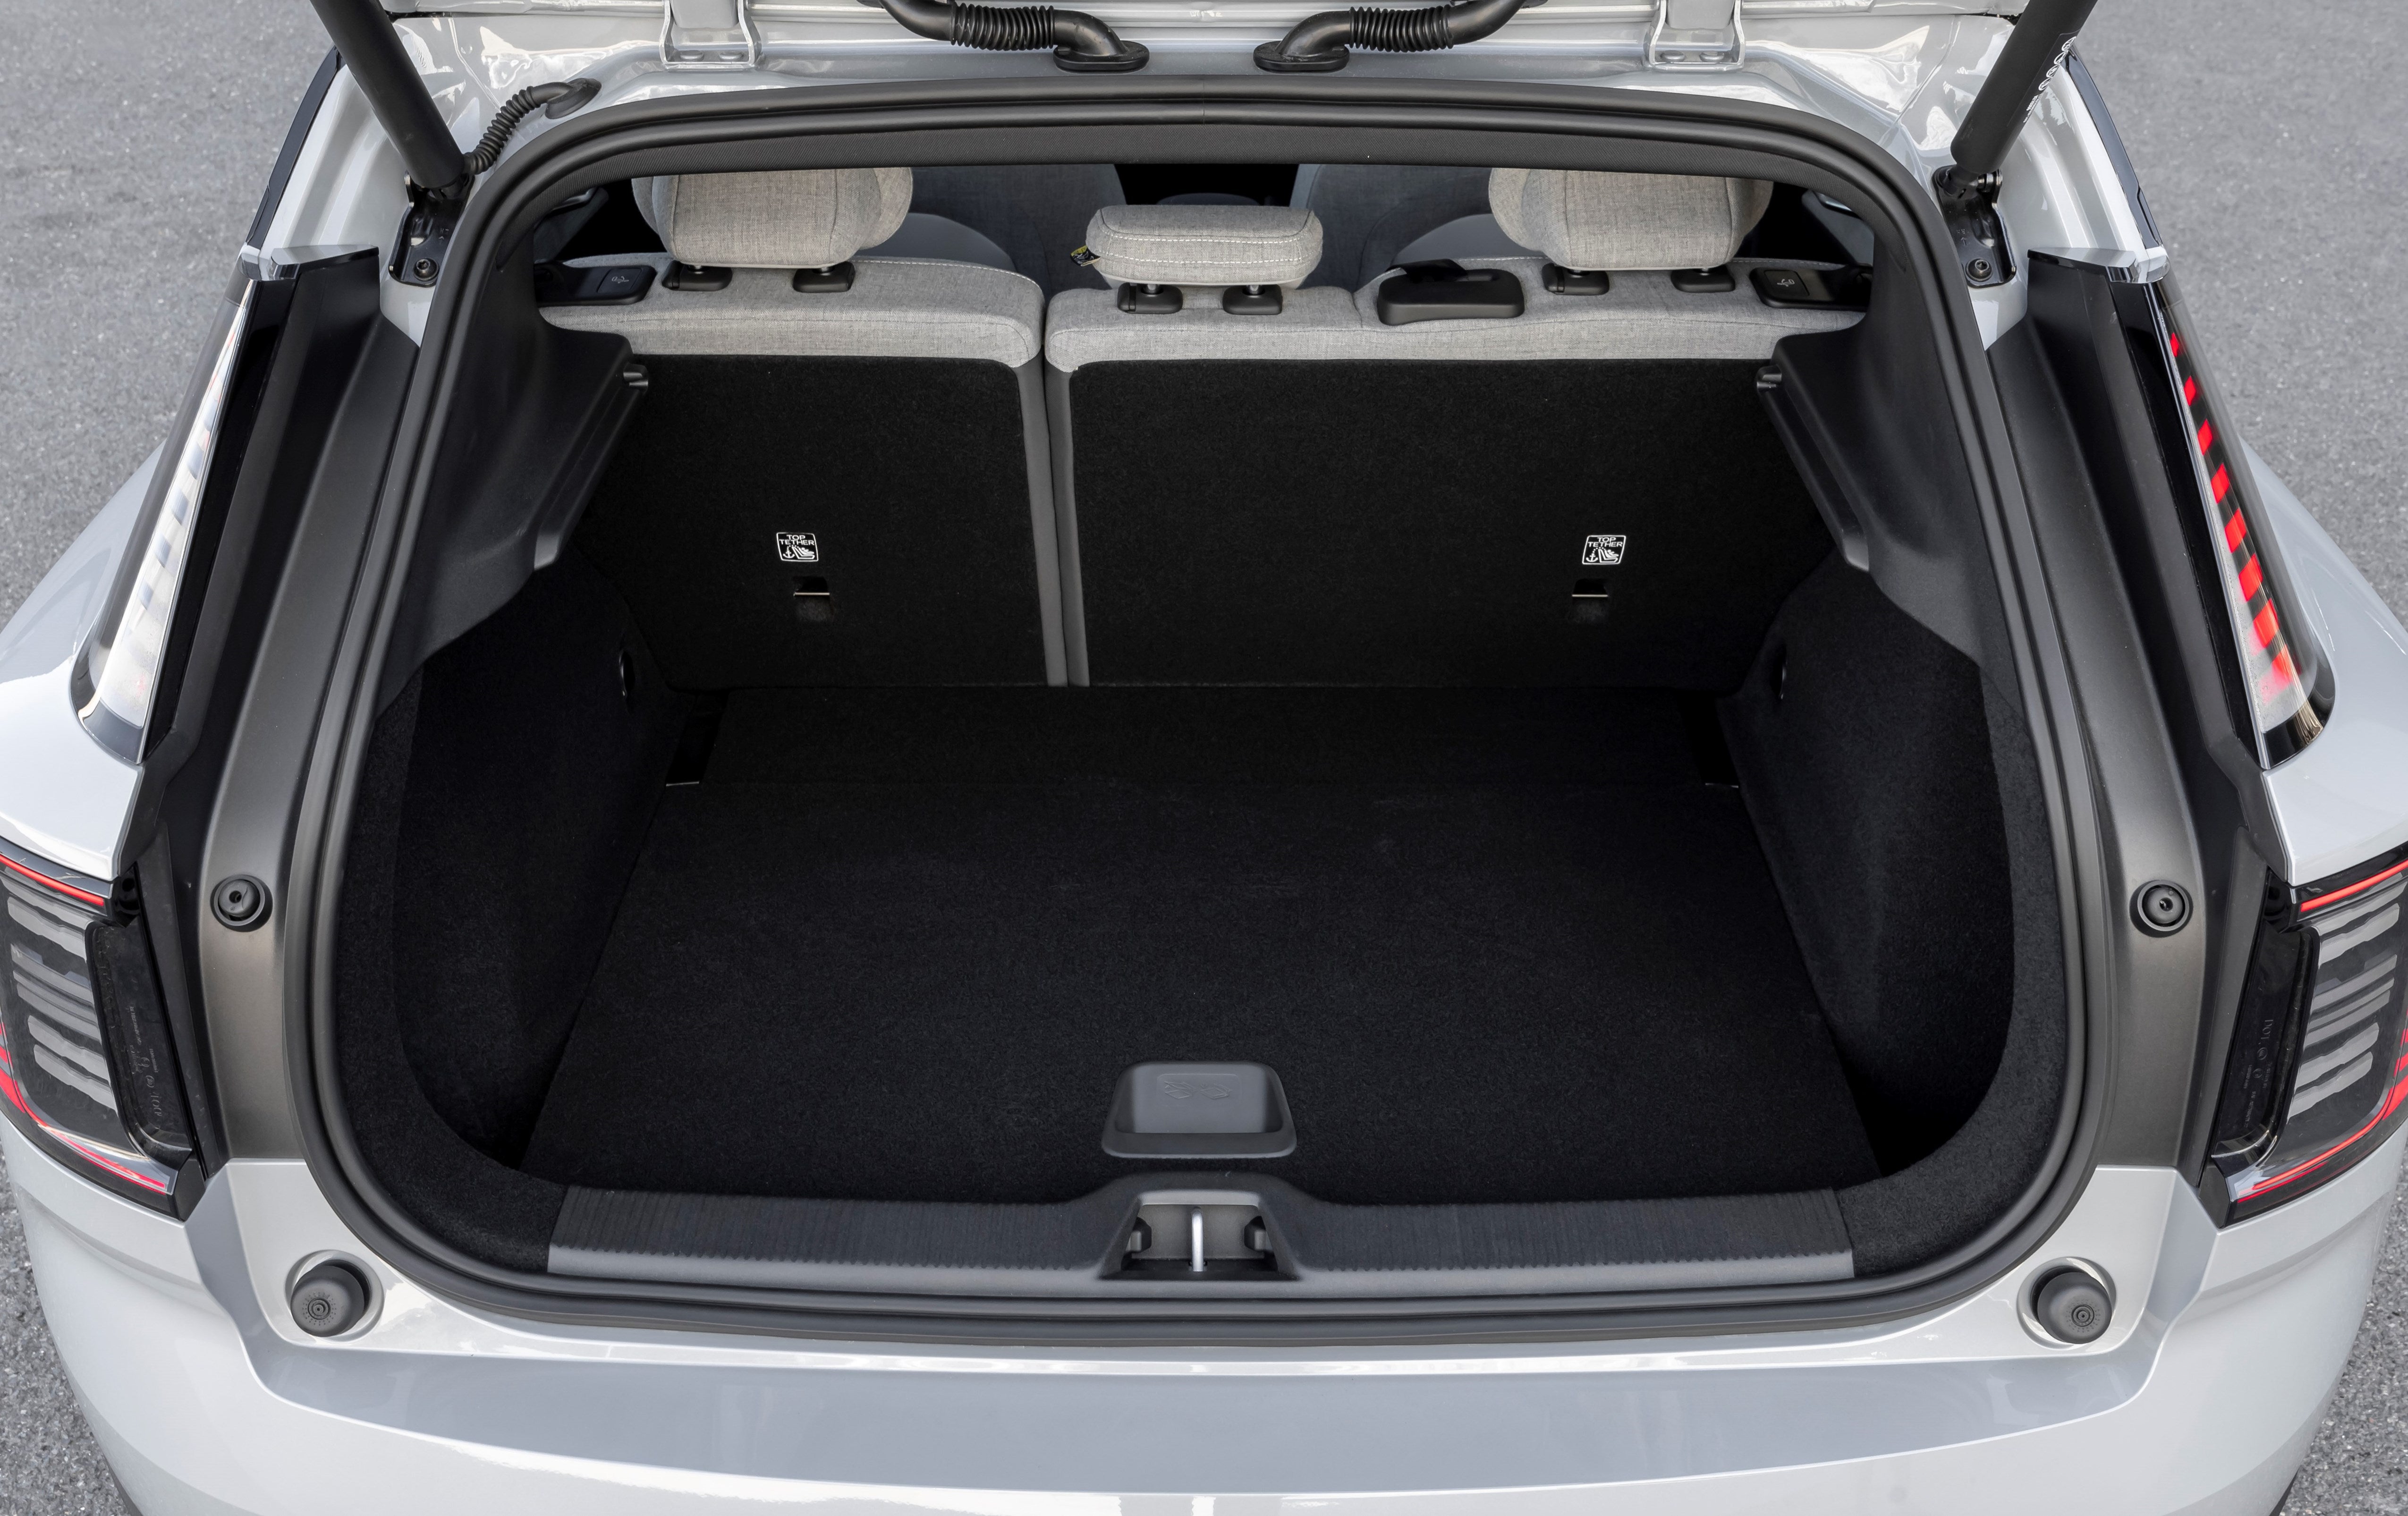 It has a wide boot with a flat floor and no lip – plus you can lower it for extra convenience